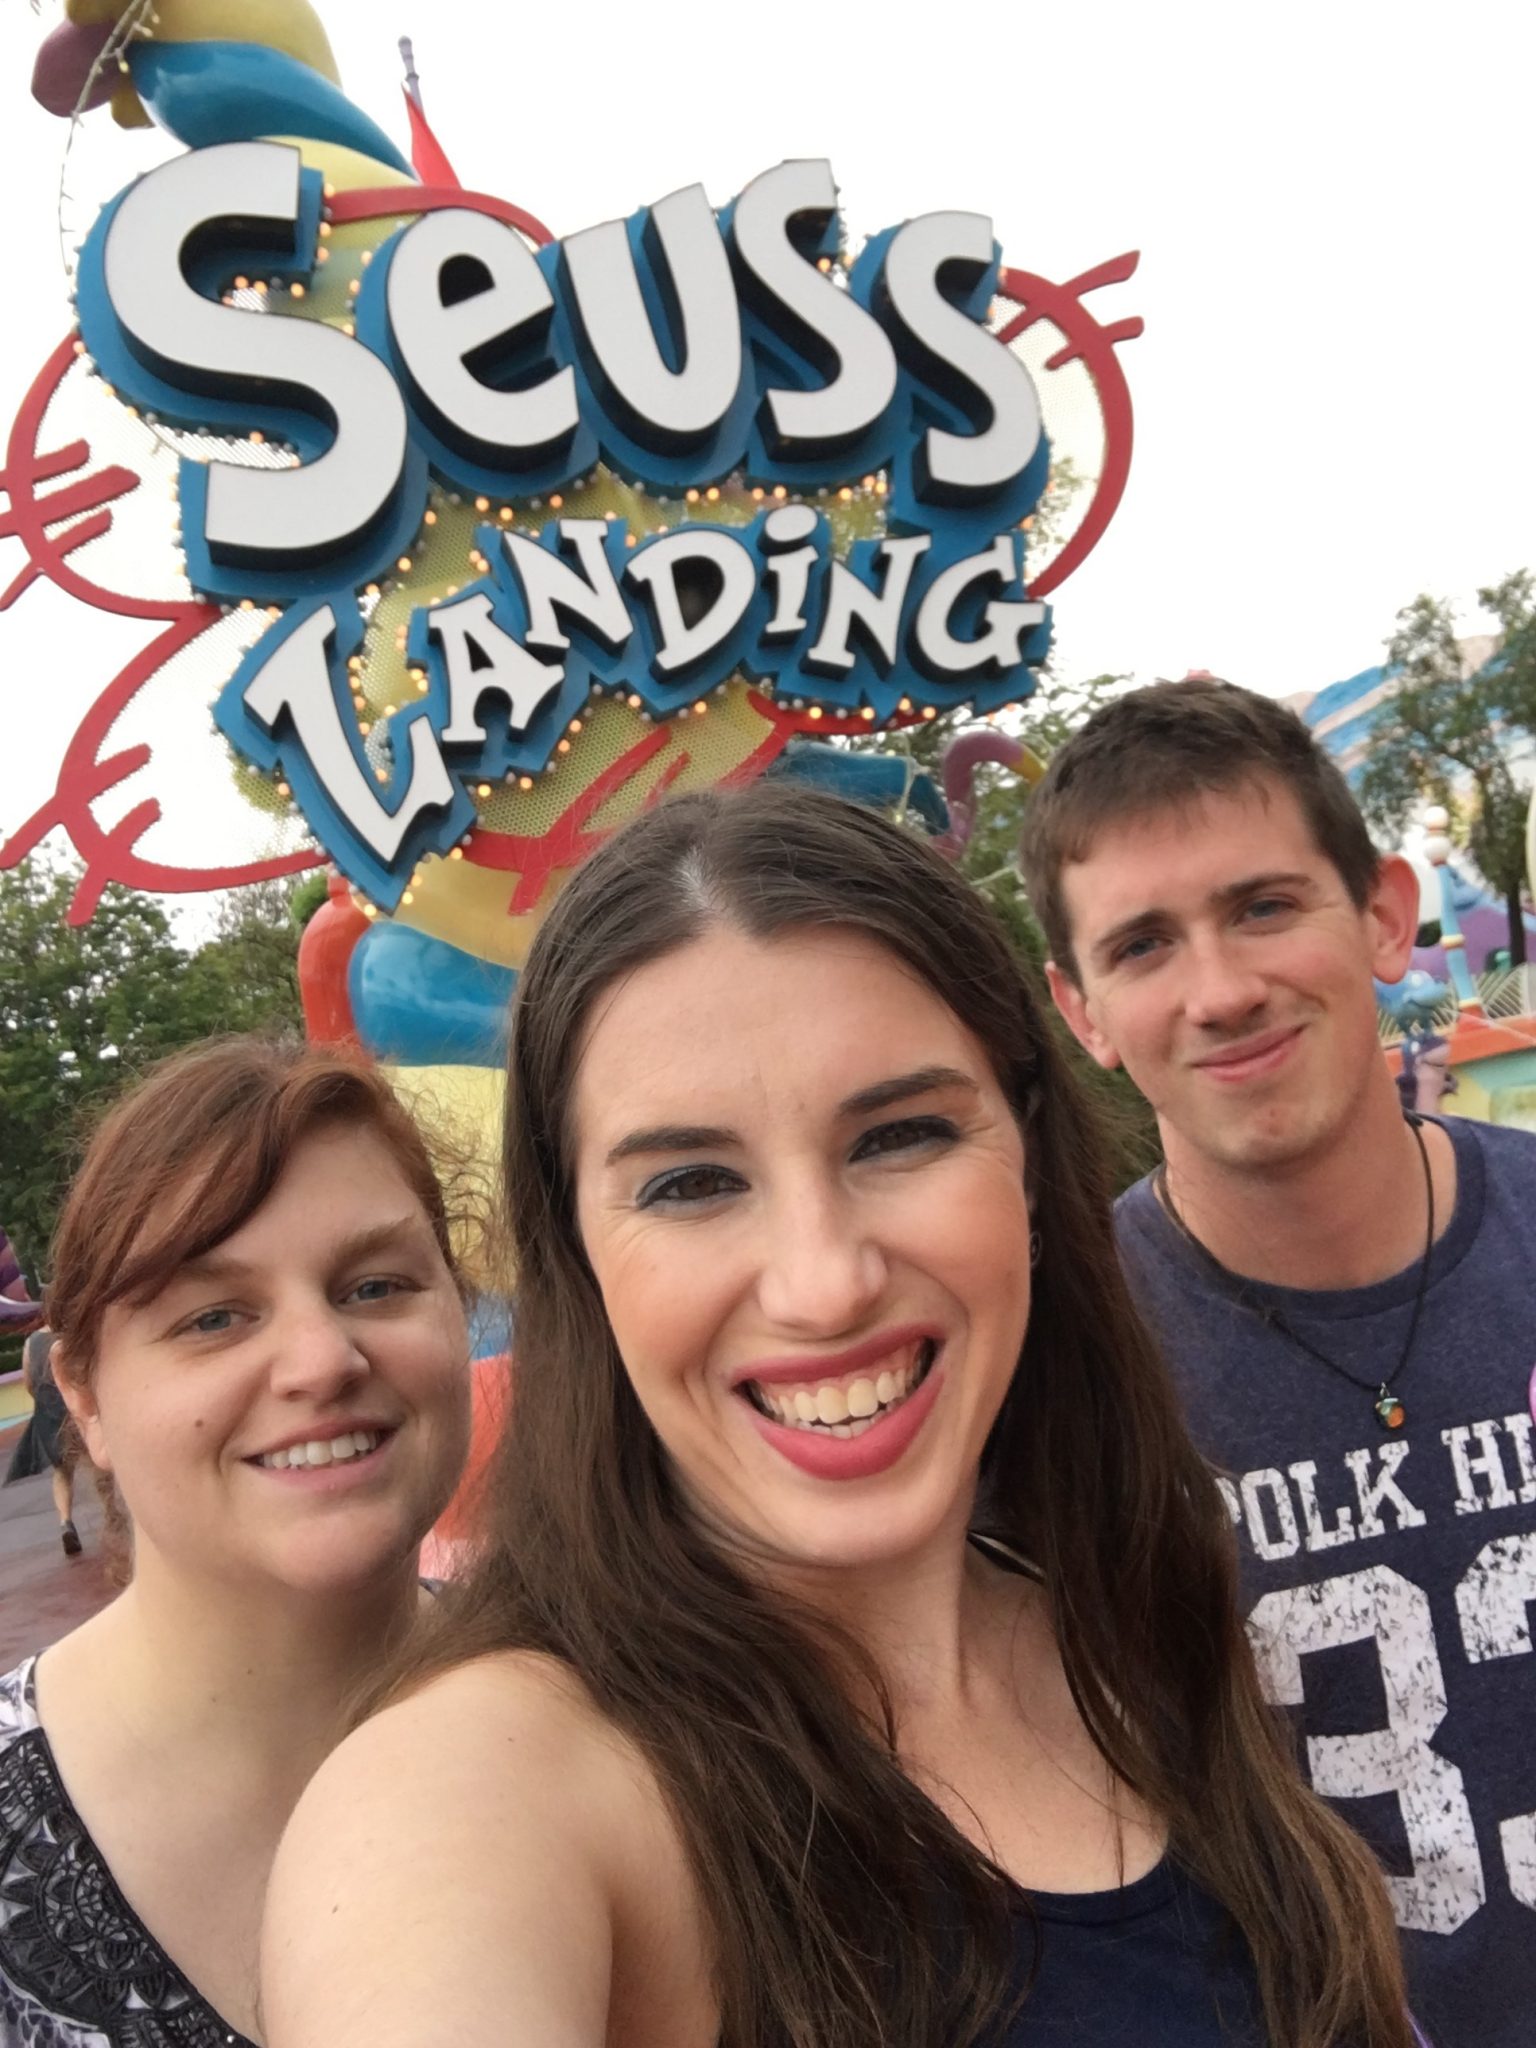 Chelsea, Robby, and Lacey in front of the Seuss landing sign.